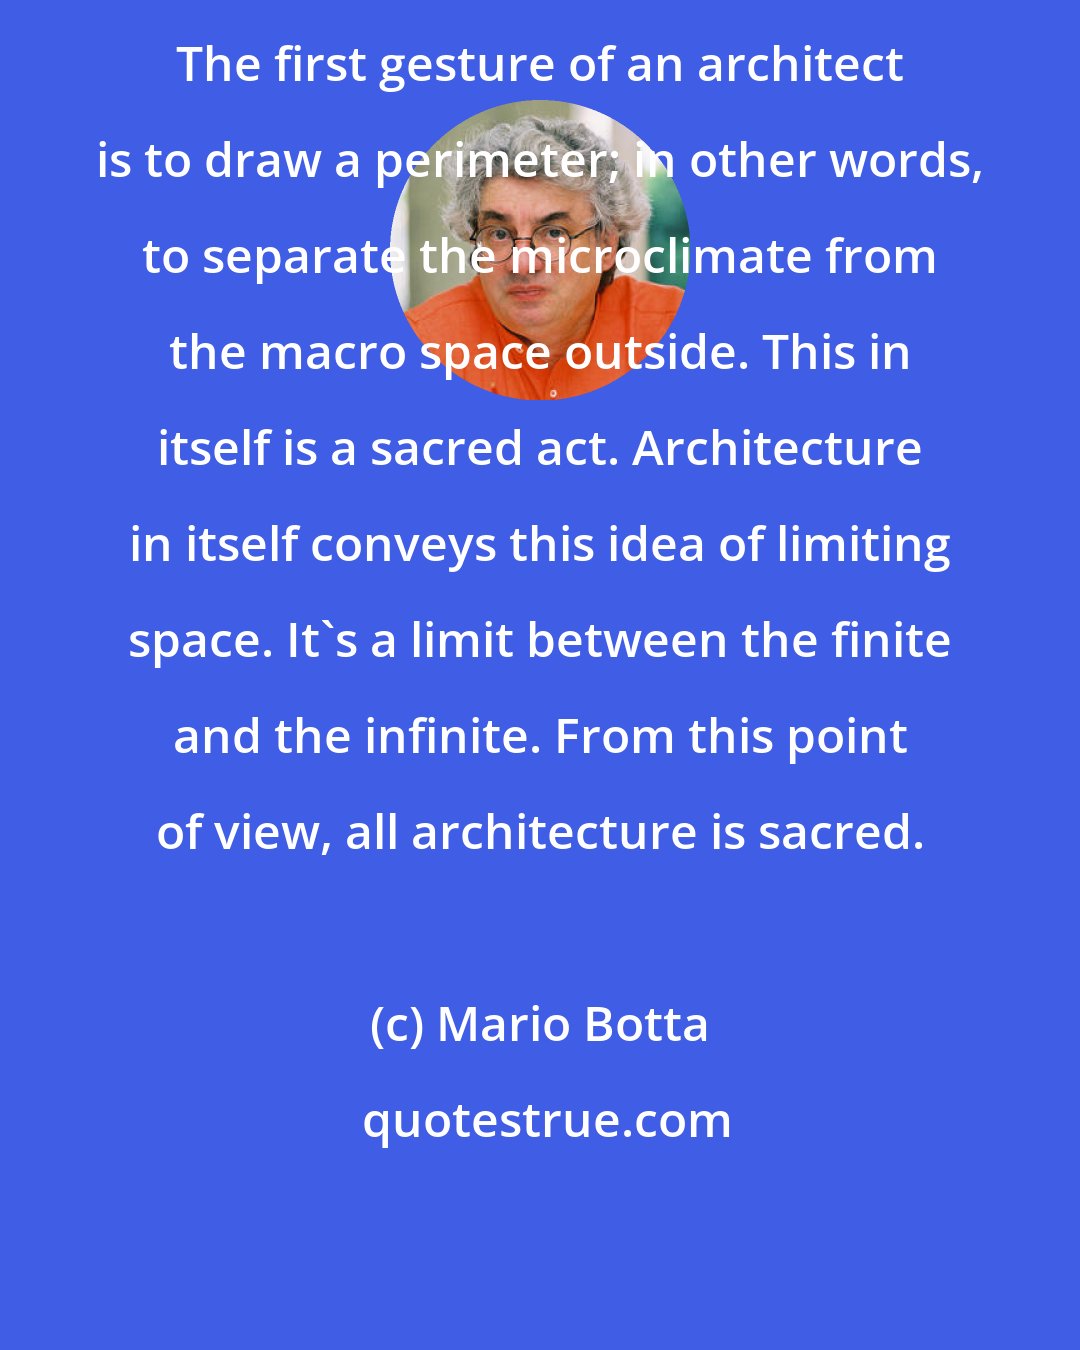 Mario Botta: The first gesture of an architect is to draw a perimeter; in other words, to separate the microclimate from the macro space outside. This in itself is a sacred act. Architecture in itself conveys this idea of limiting space. It's a limit between the finite and the infinite. From this point of view, all architecture is sacred.